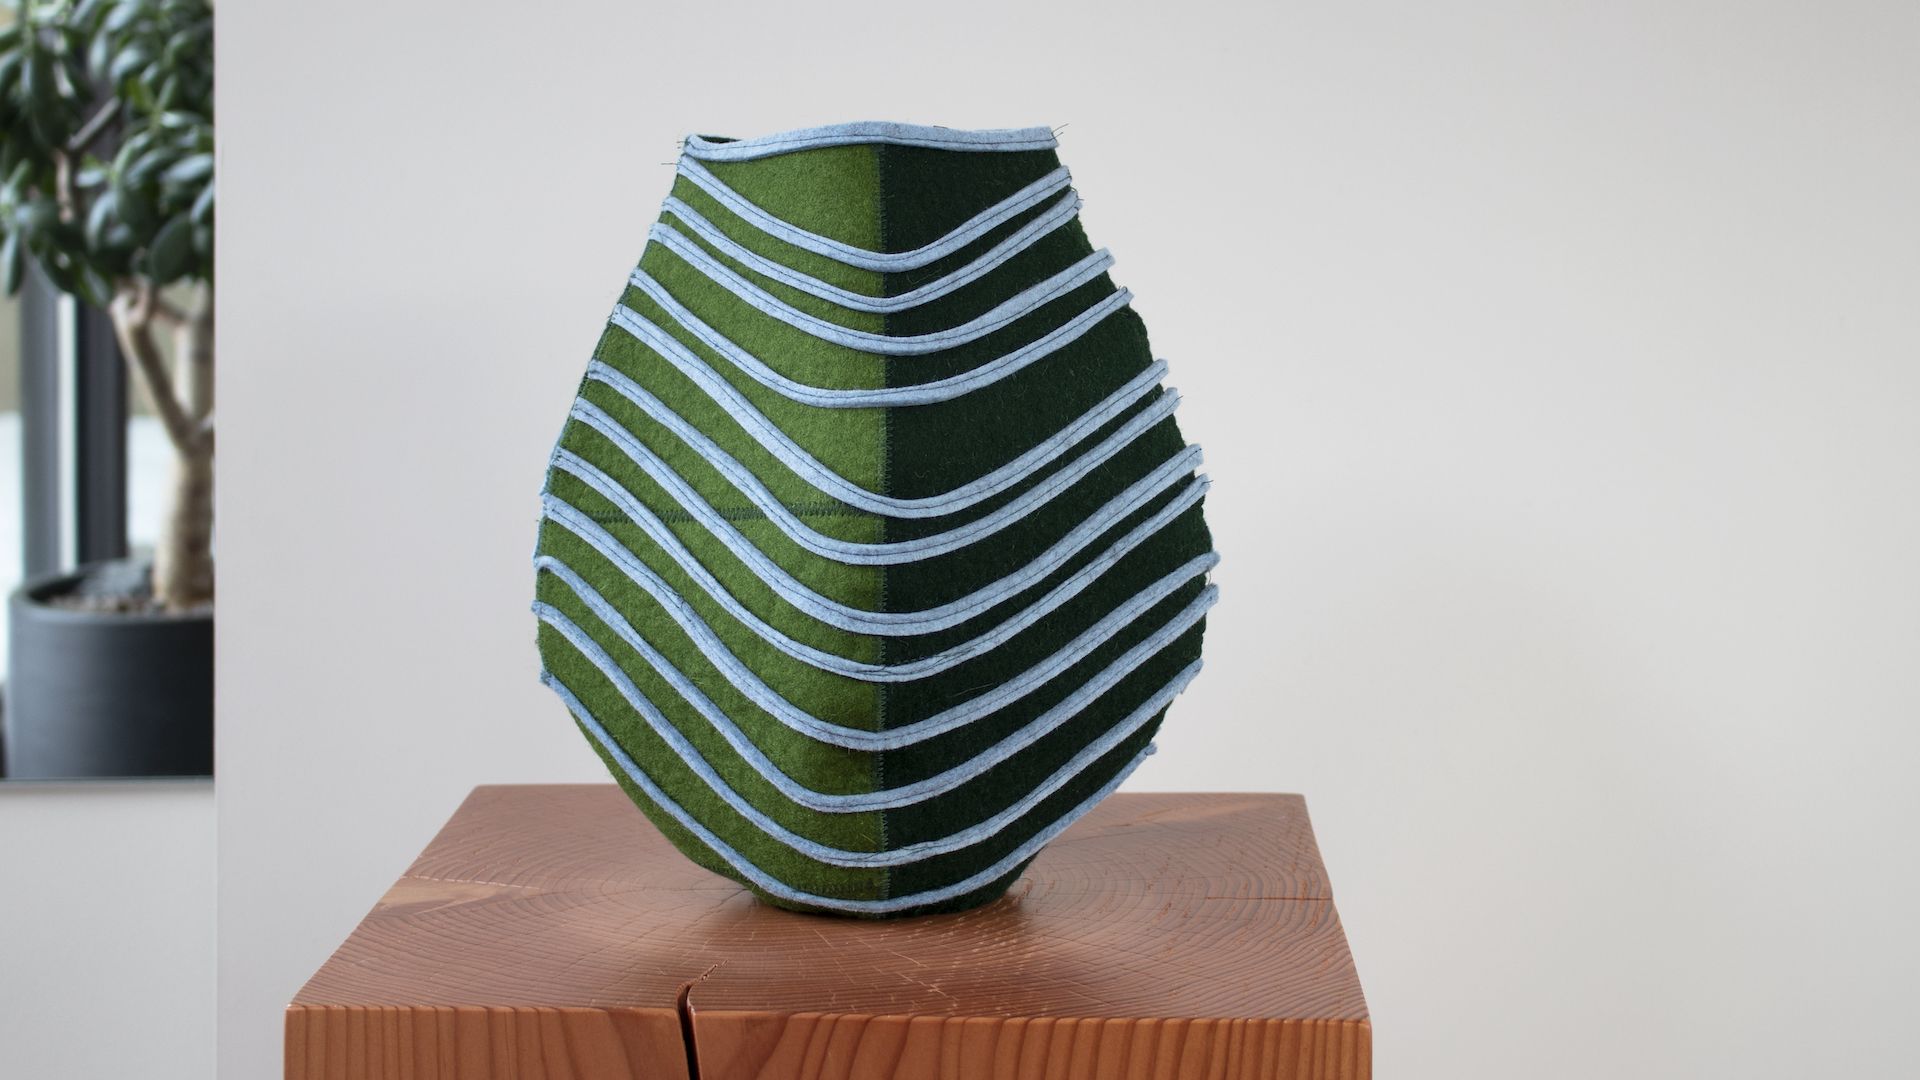 Blue and green striped vessel made of repurposed wool felt scraps from the manufacturing process